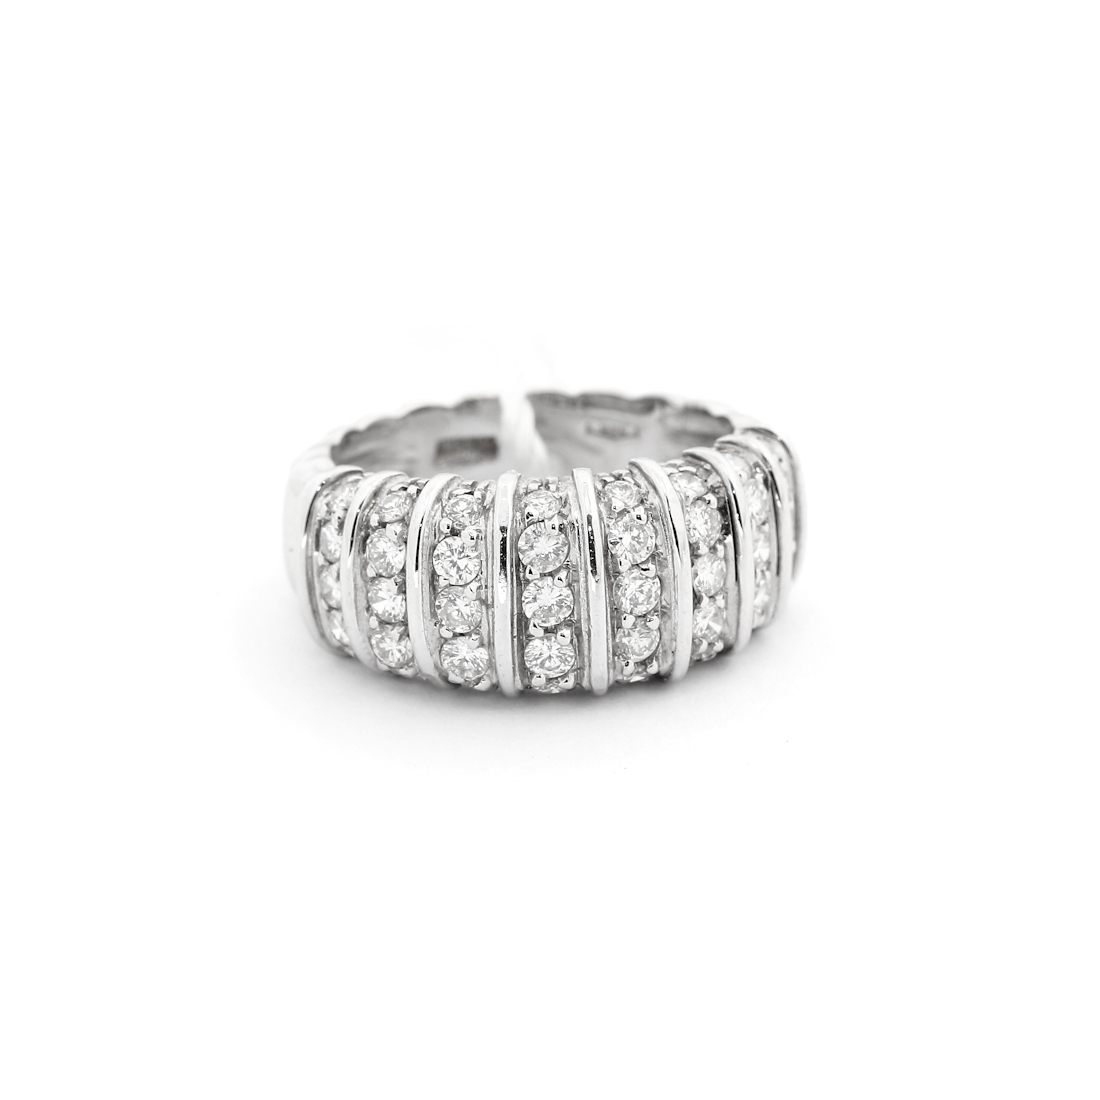 750 Mill. White Gold Ring with 1,42 Ct. Diamonds